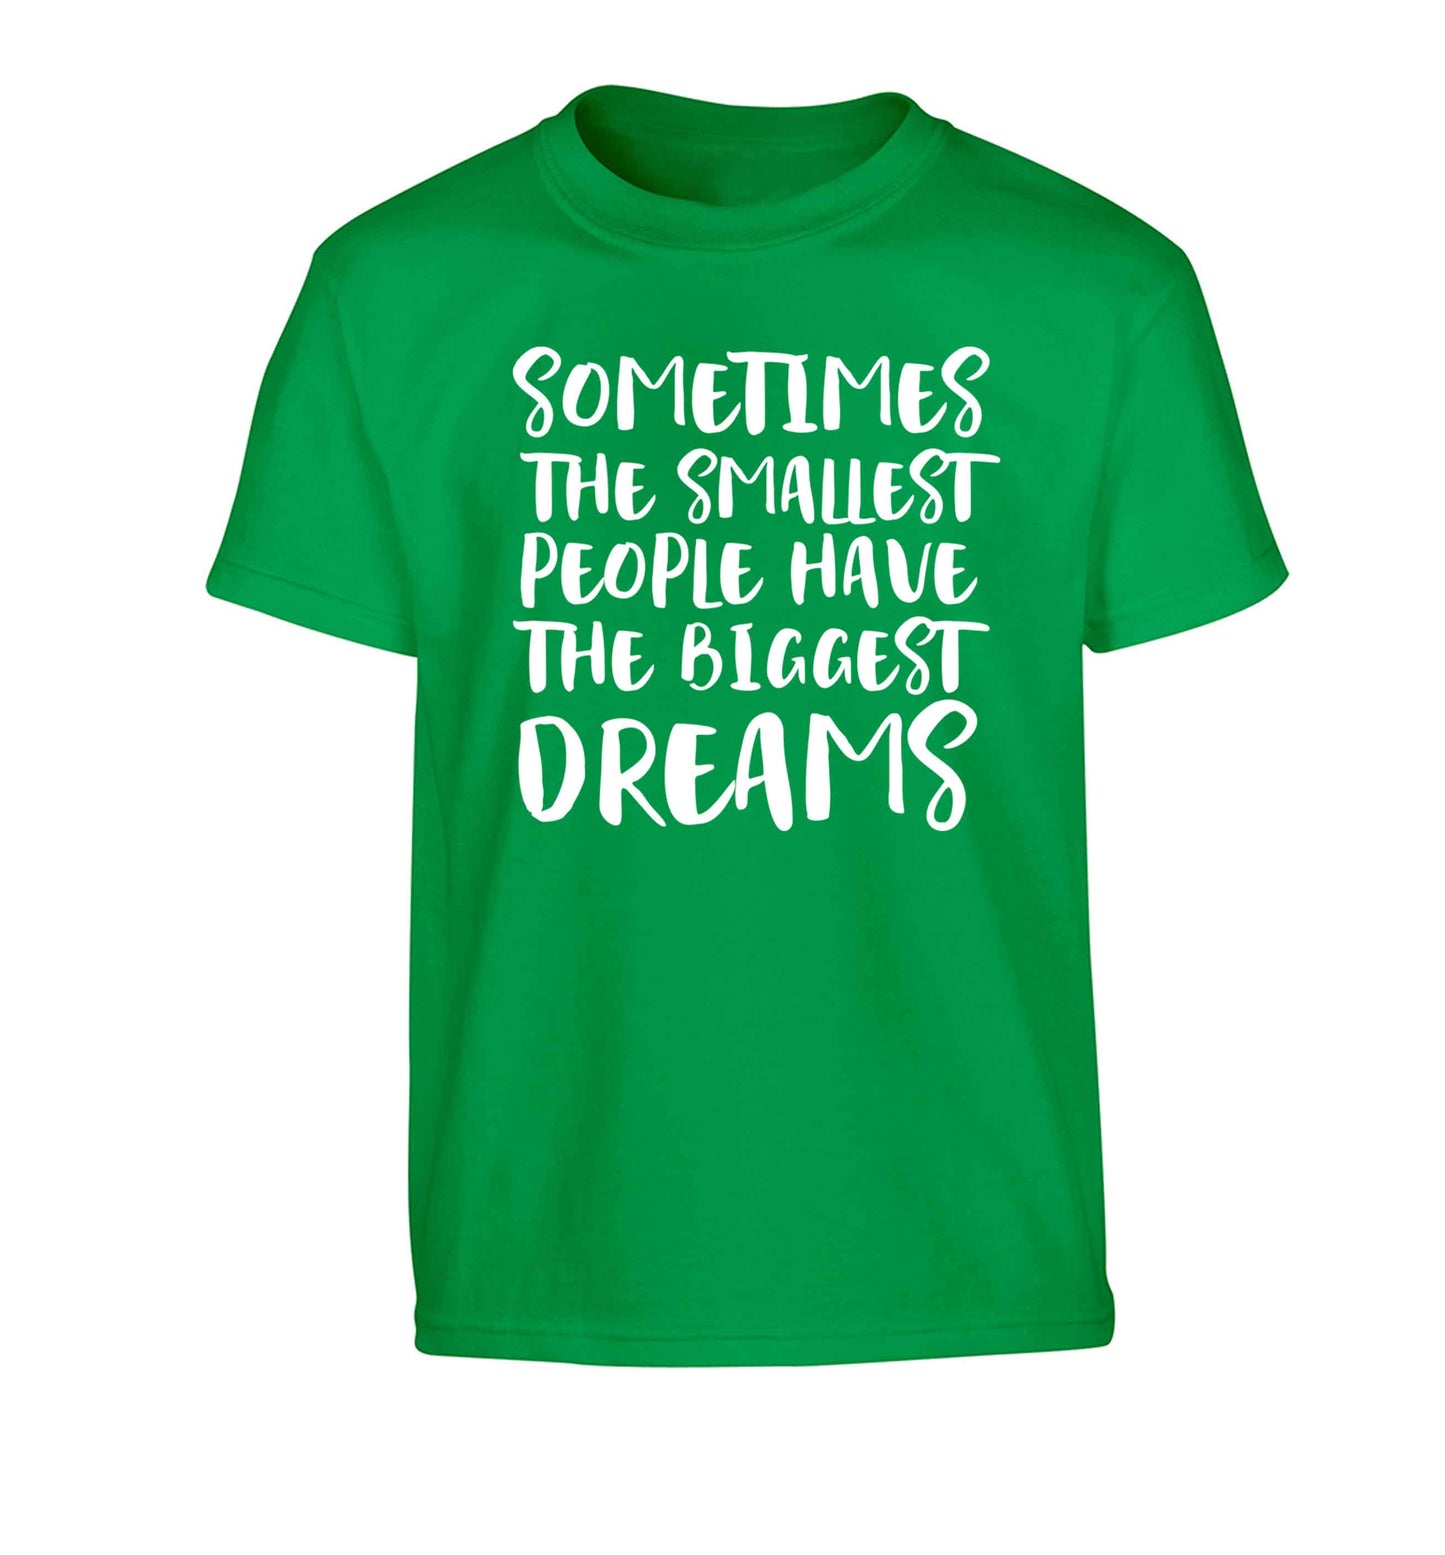 Sometimes the smallest people have the biggest dreams Children's green Tshirt 12-13 Years